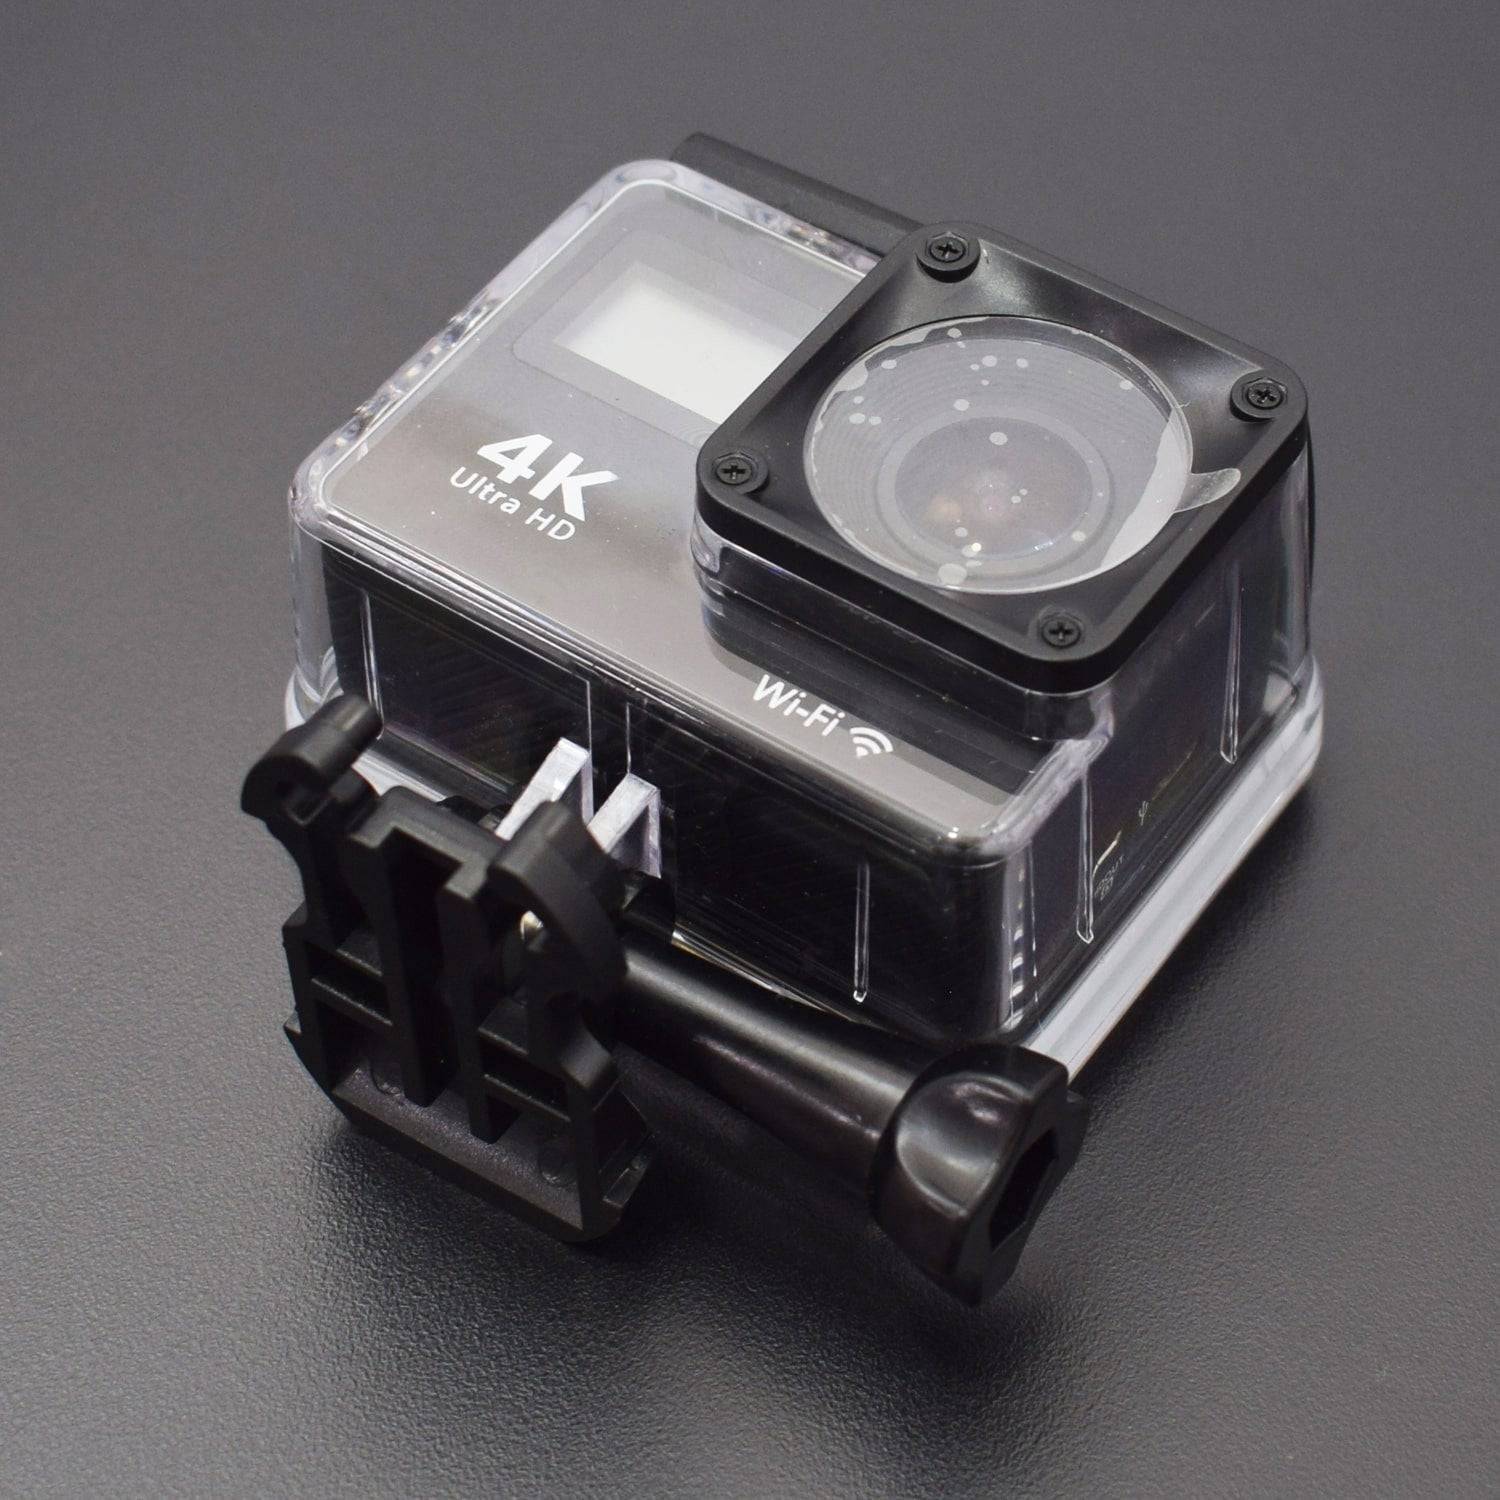 New Waterproof Sports Action Camera Action Cam Camera UHD 4K WiFi DV 170 °  Wide Angle